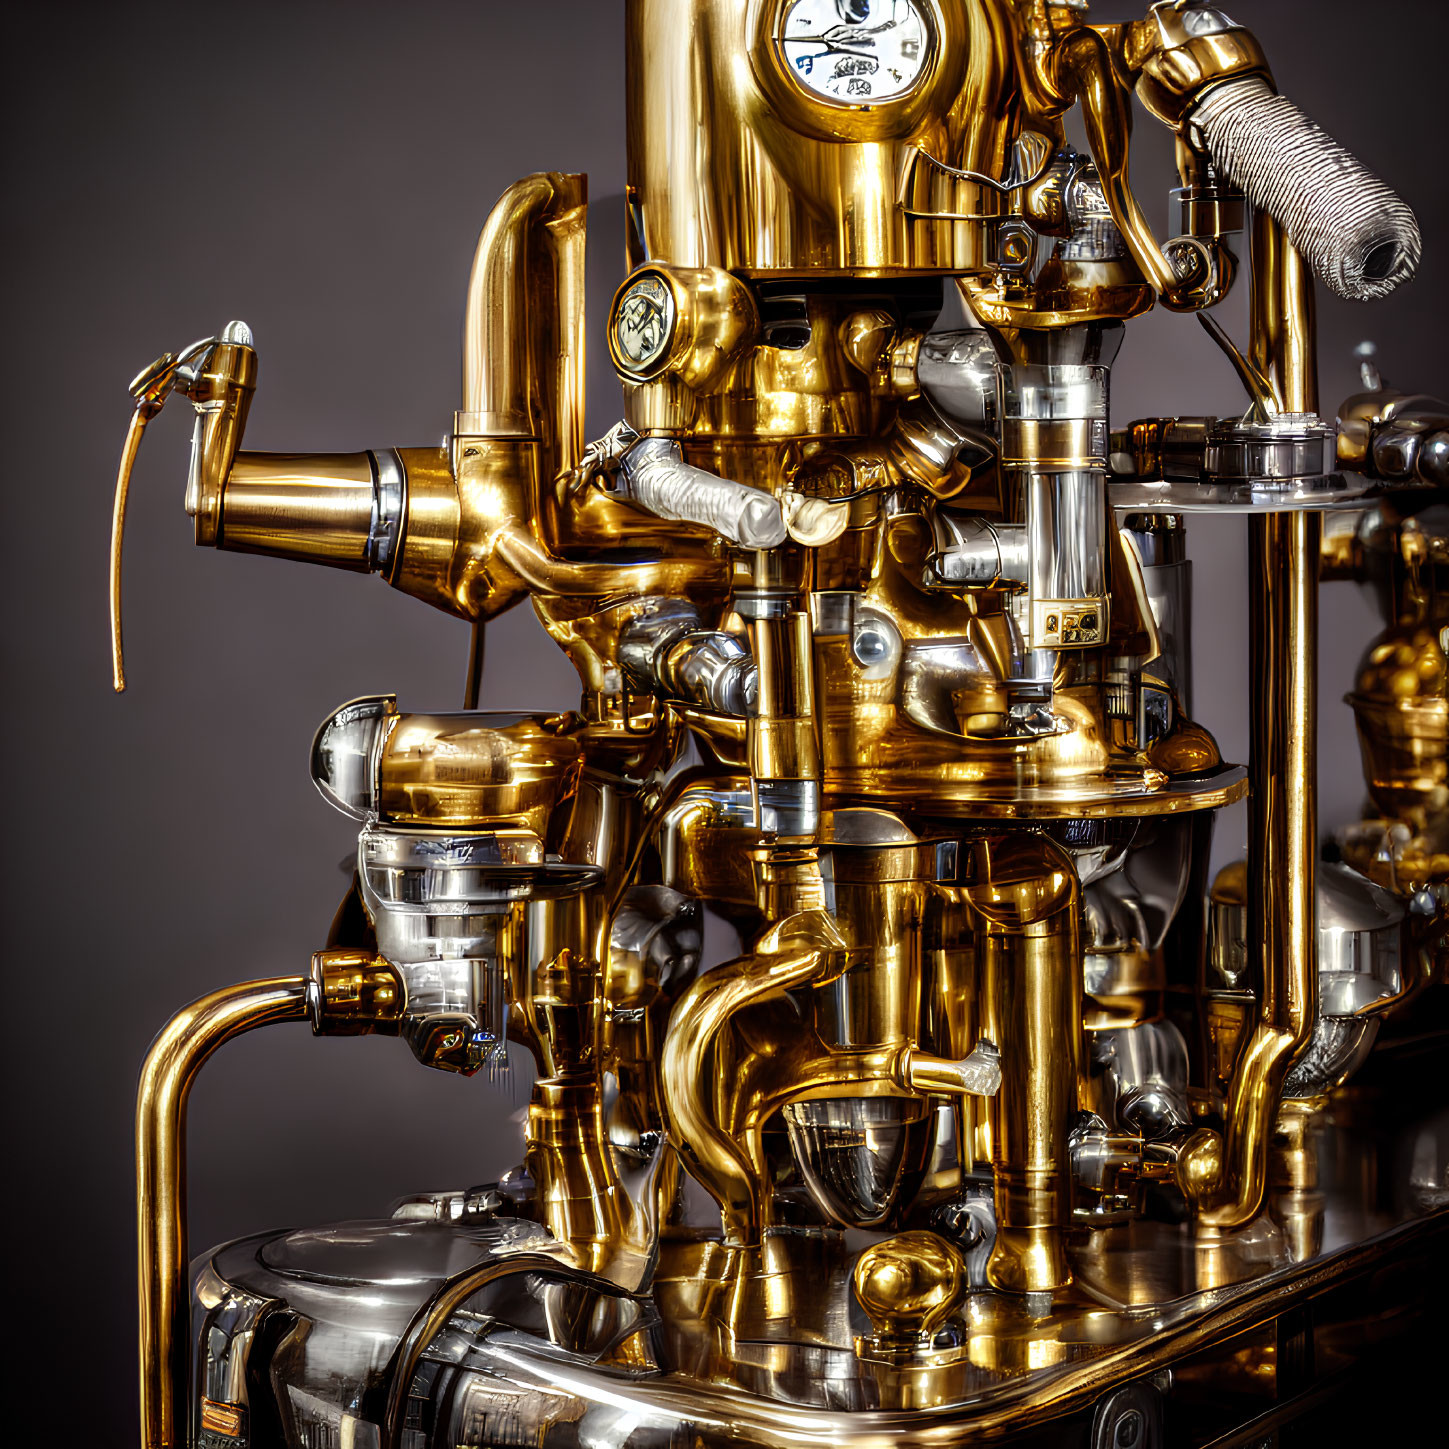 Vintage Brass Espresso Machine with Gauges, Levers, and Pipes